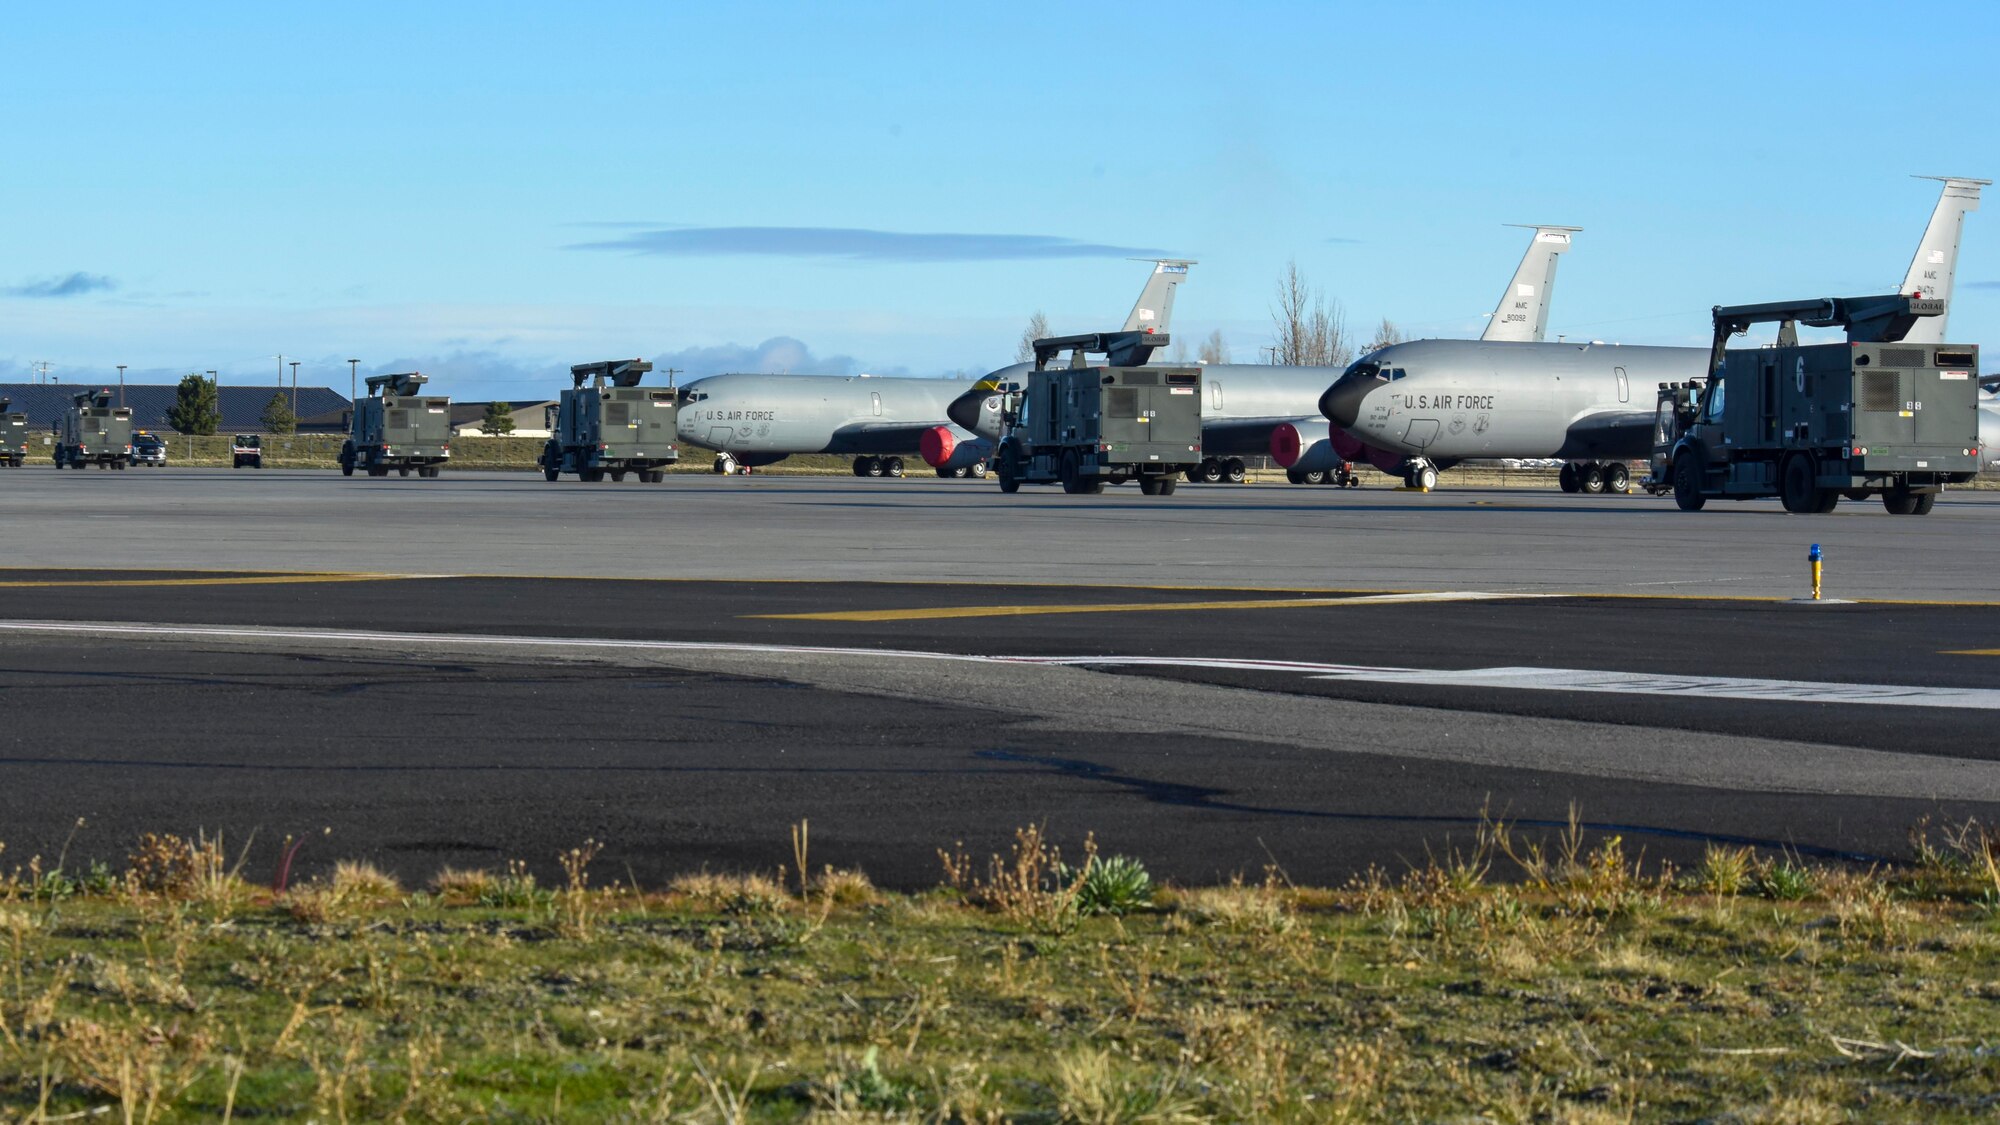 A line of extended-reach aircraft deicers rush to the flightline to prepare aircraft for takeoff during exercise Global Thunder 22, at Fairchild Air Force Base, Washington, Nov. 7, 2021. This U.S. Strategic Command exercise’s fundamental mission is to deter strategic attack, which is an existential threat to the U.S. and its allies. (U.S. Air Force photo by Airman 1st Class Anneliese Kaiser)